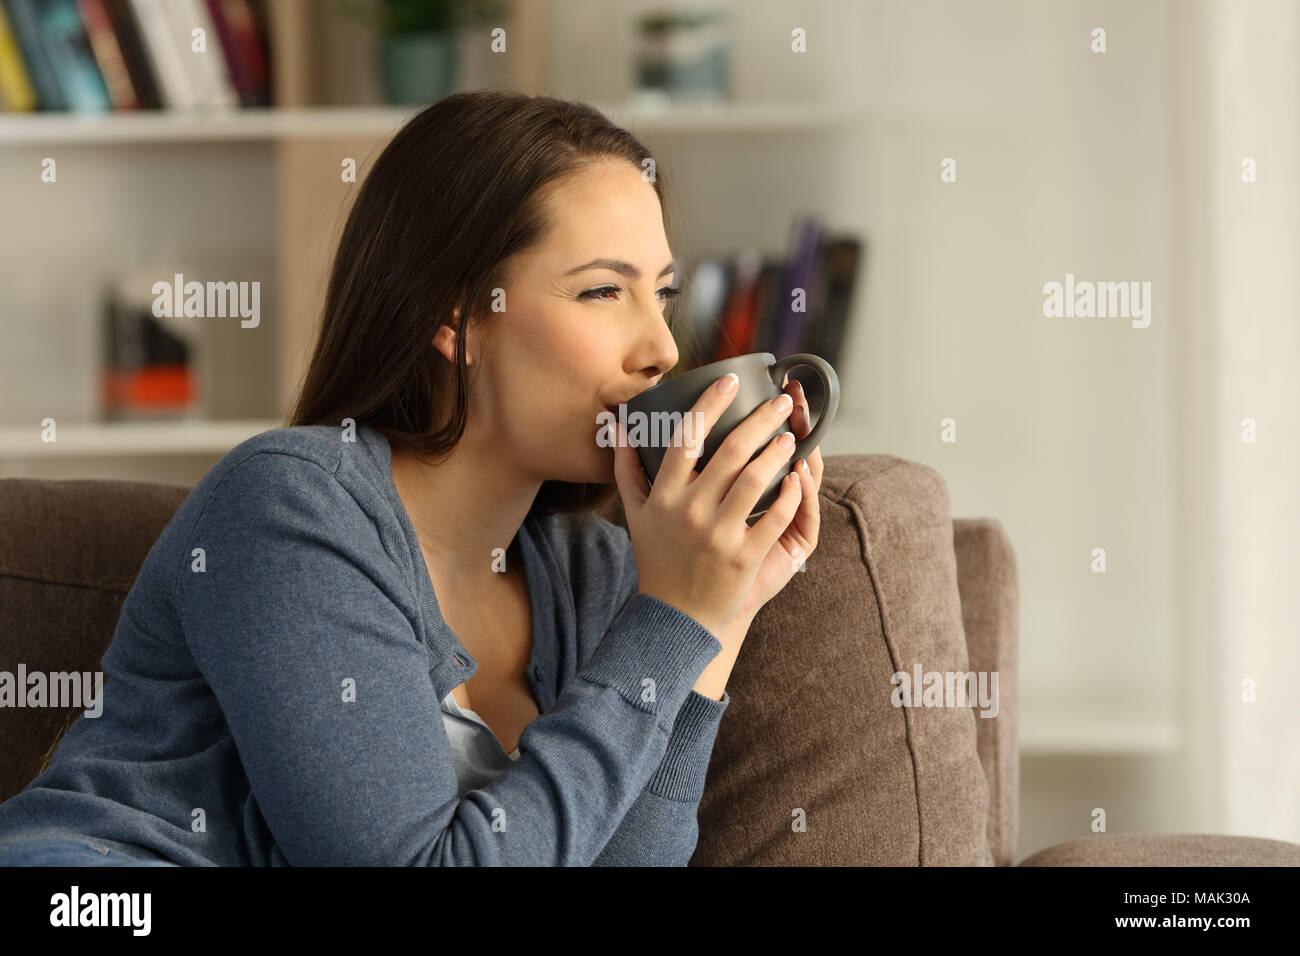 Relaxed happy woman drinking coffee and looking away sitting on a couch in the living room at home Stock Photo